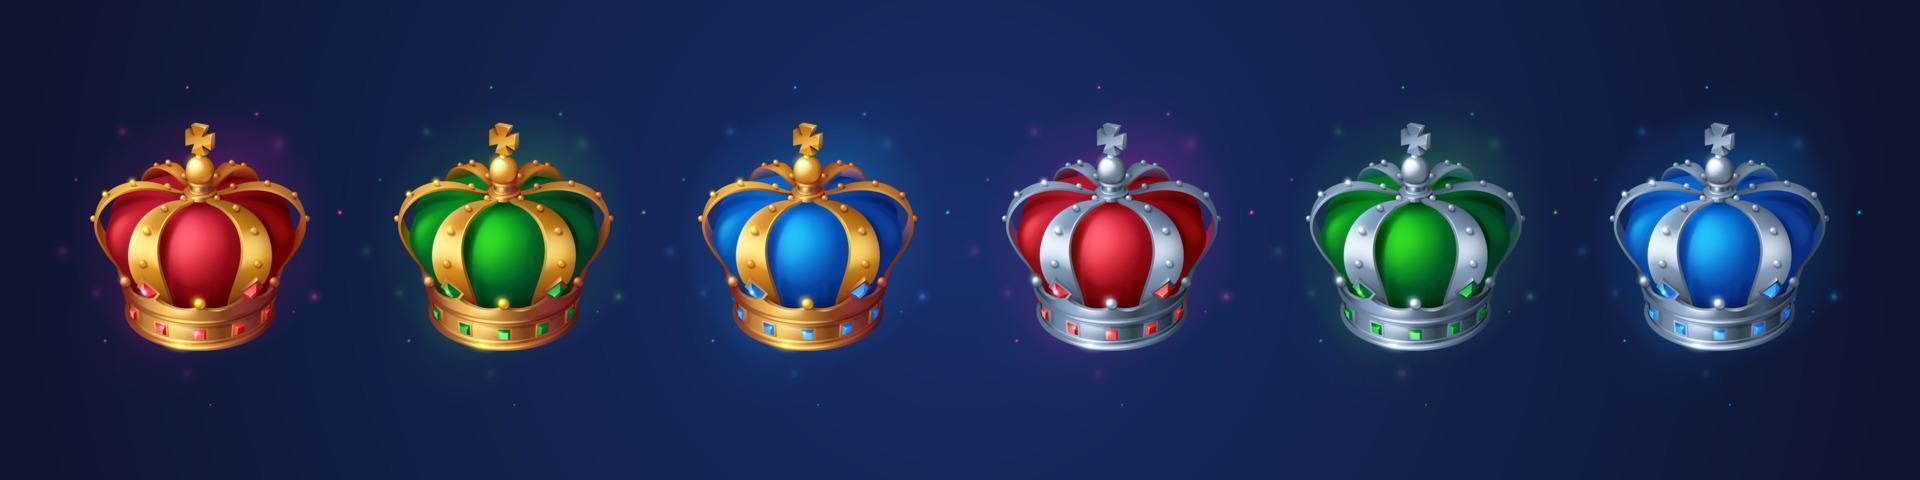 Set of golden crowns for king or queen game assets vector